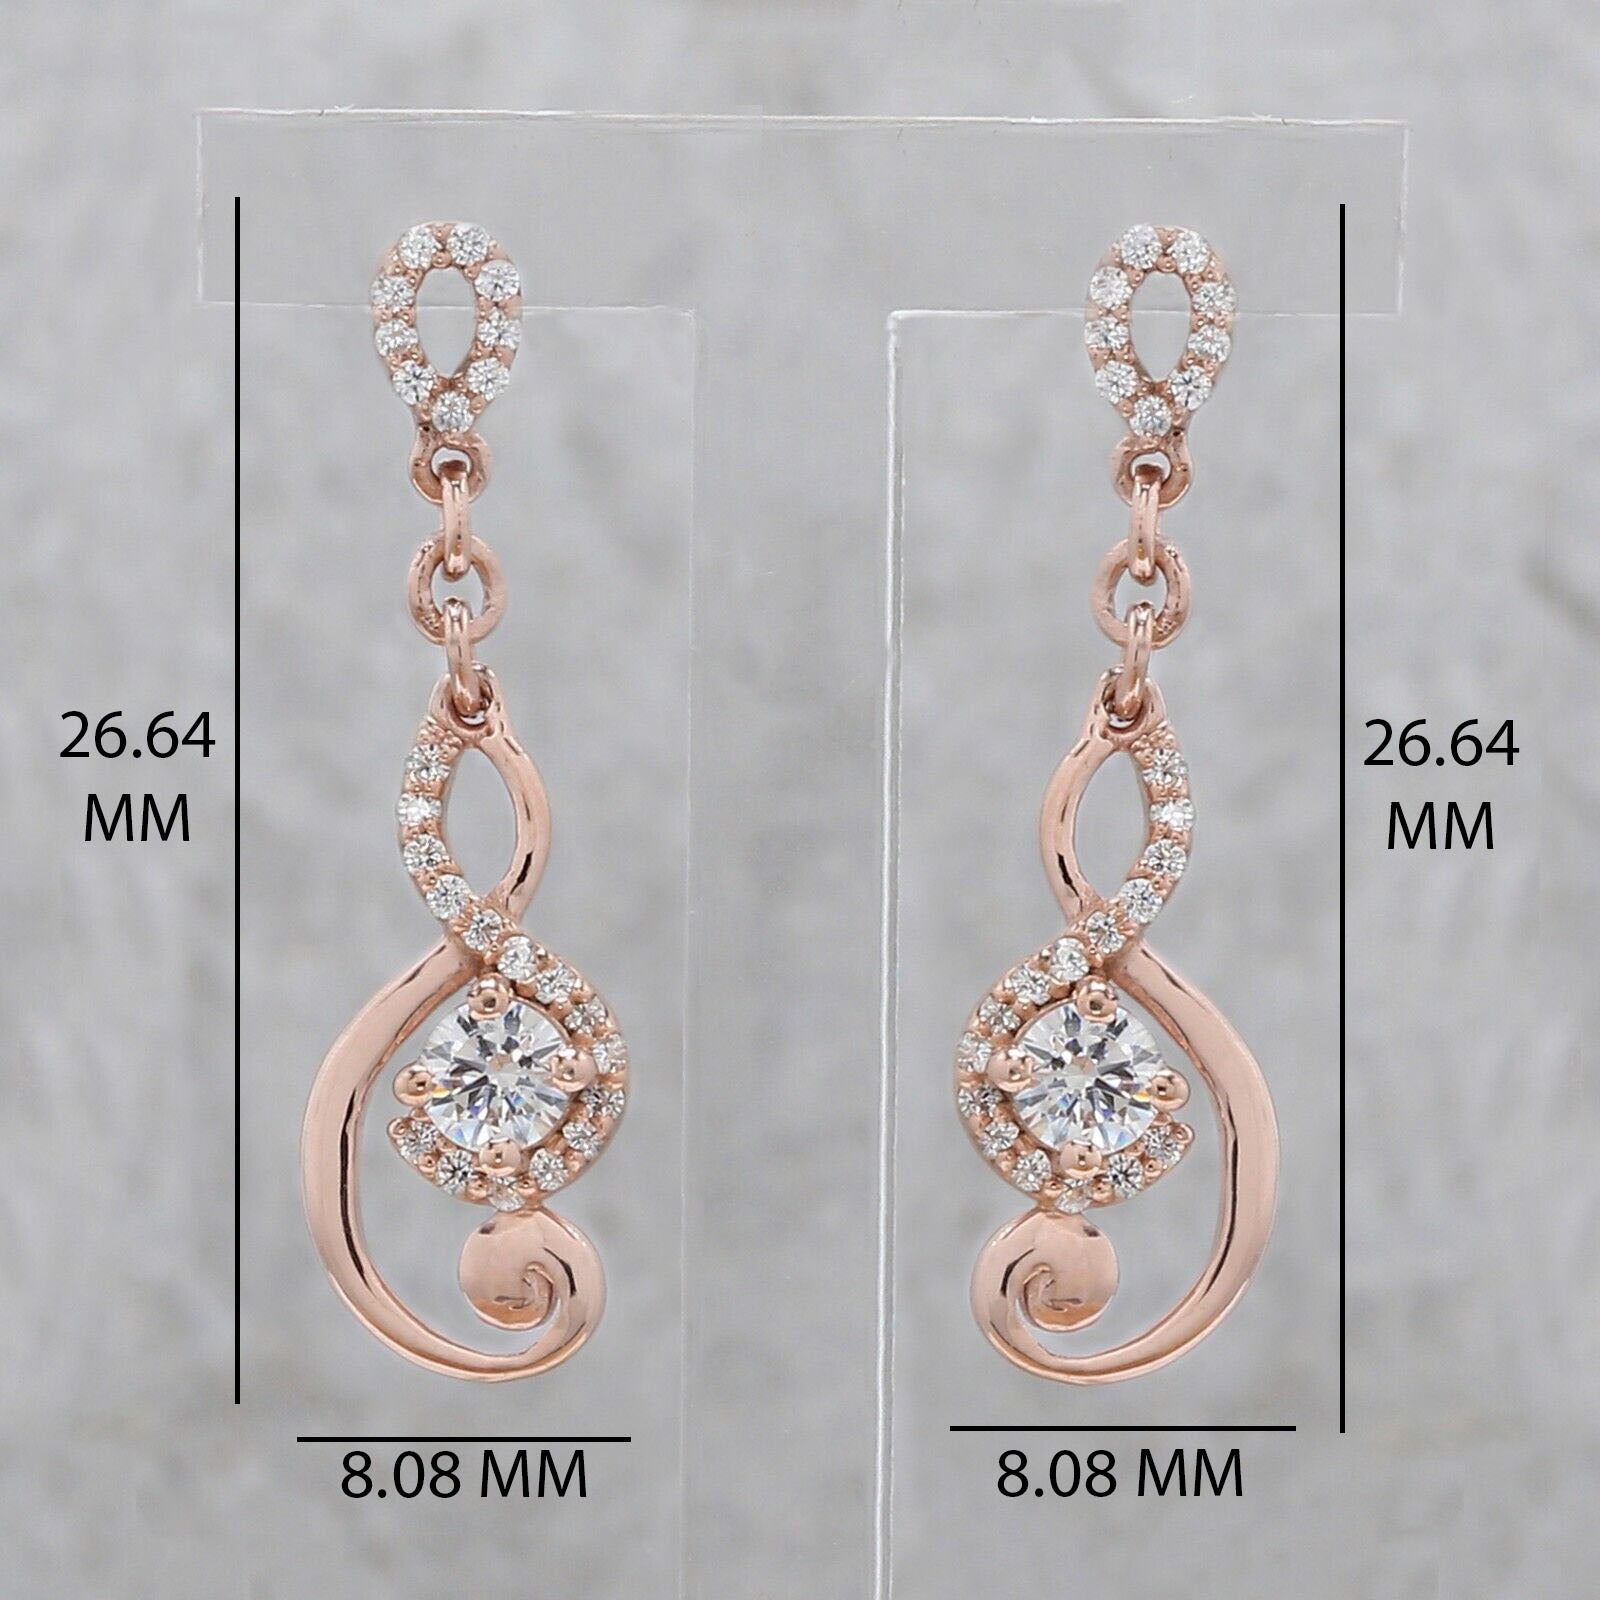 Round White Color Diamond Earring Engagement Wedding Gift Earring 14K Solid Rose White Yellow Gold Earring 0.58 CT KD1006